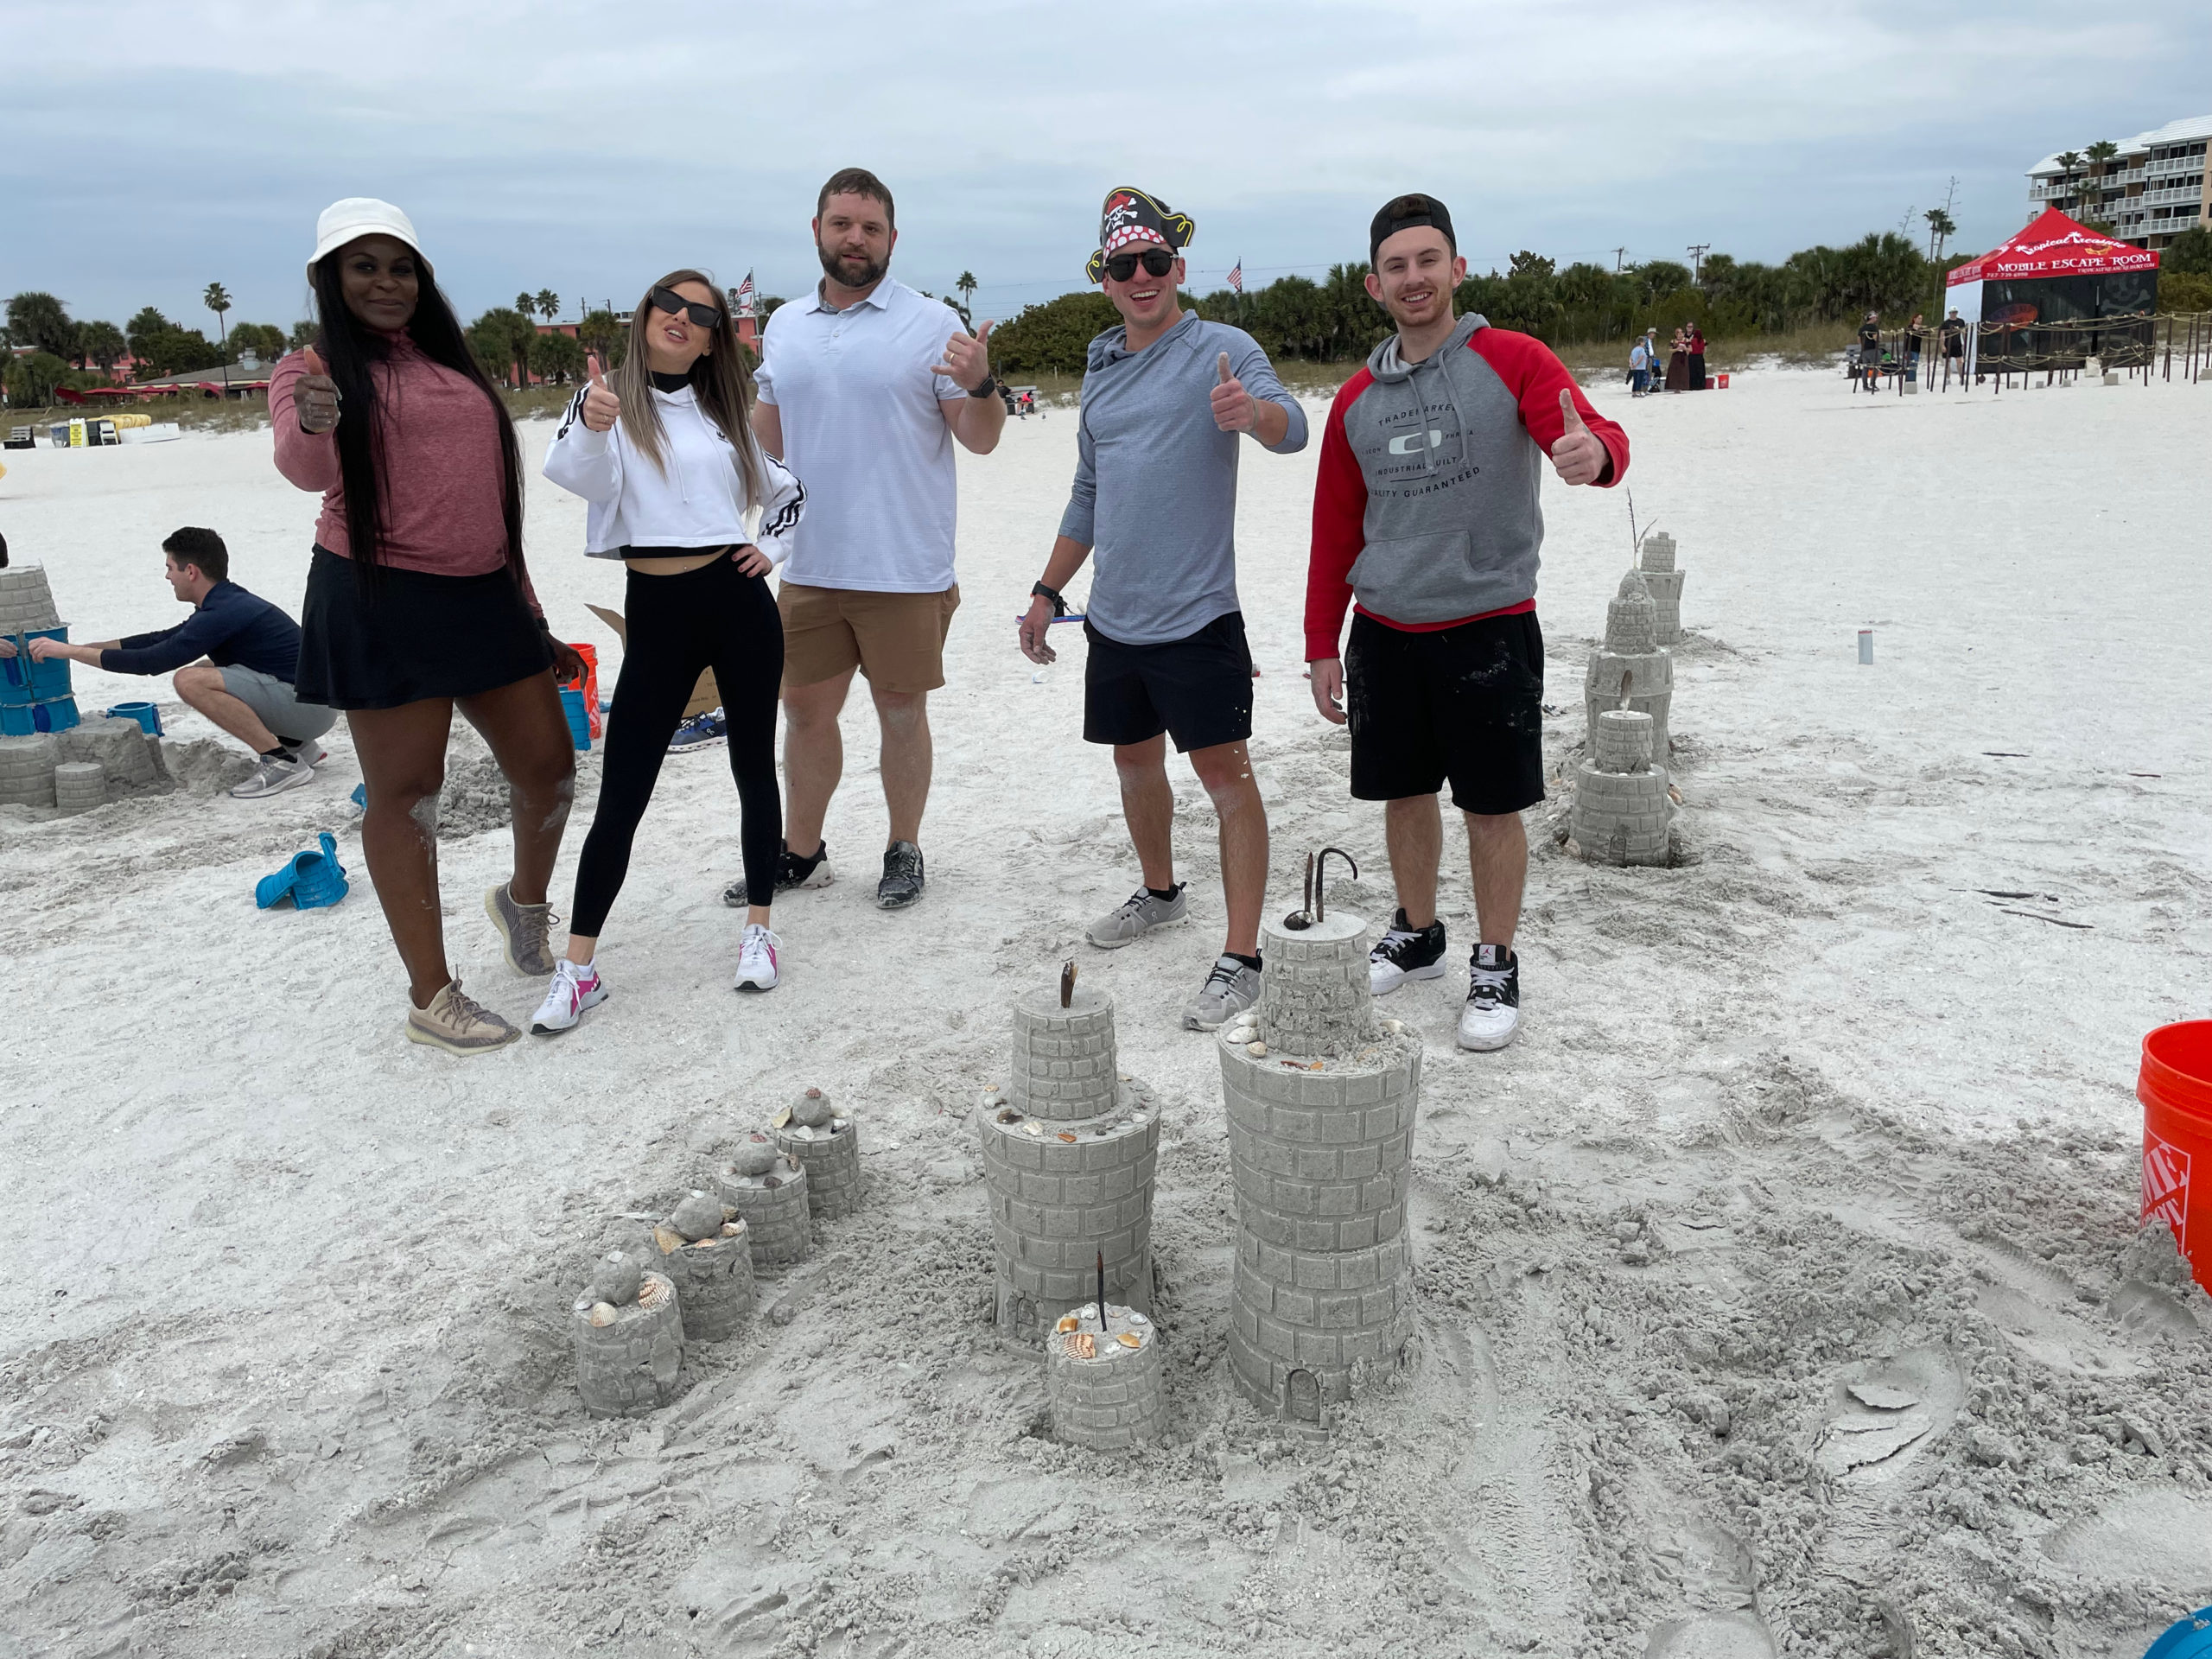 Four people with thumbs up stand behind a sandcastle with two large tiers and several small tiers on the beach.